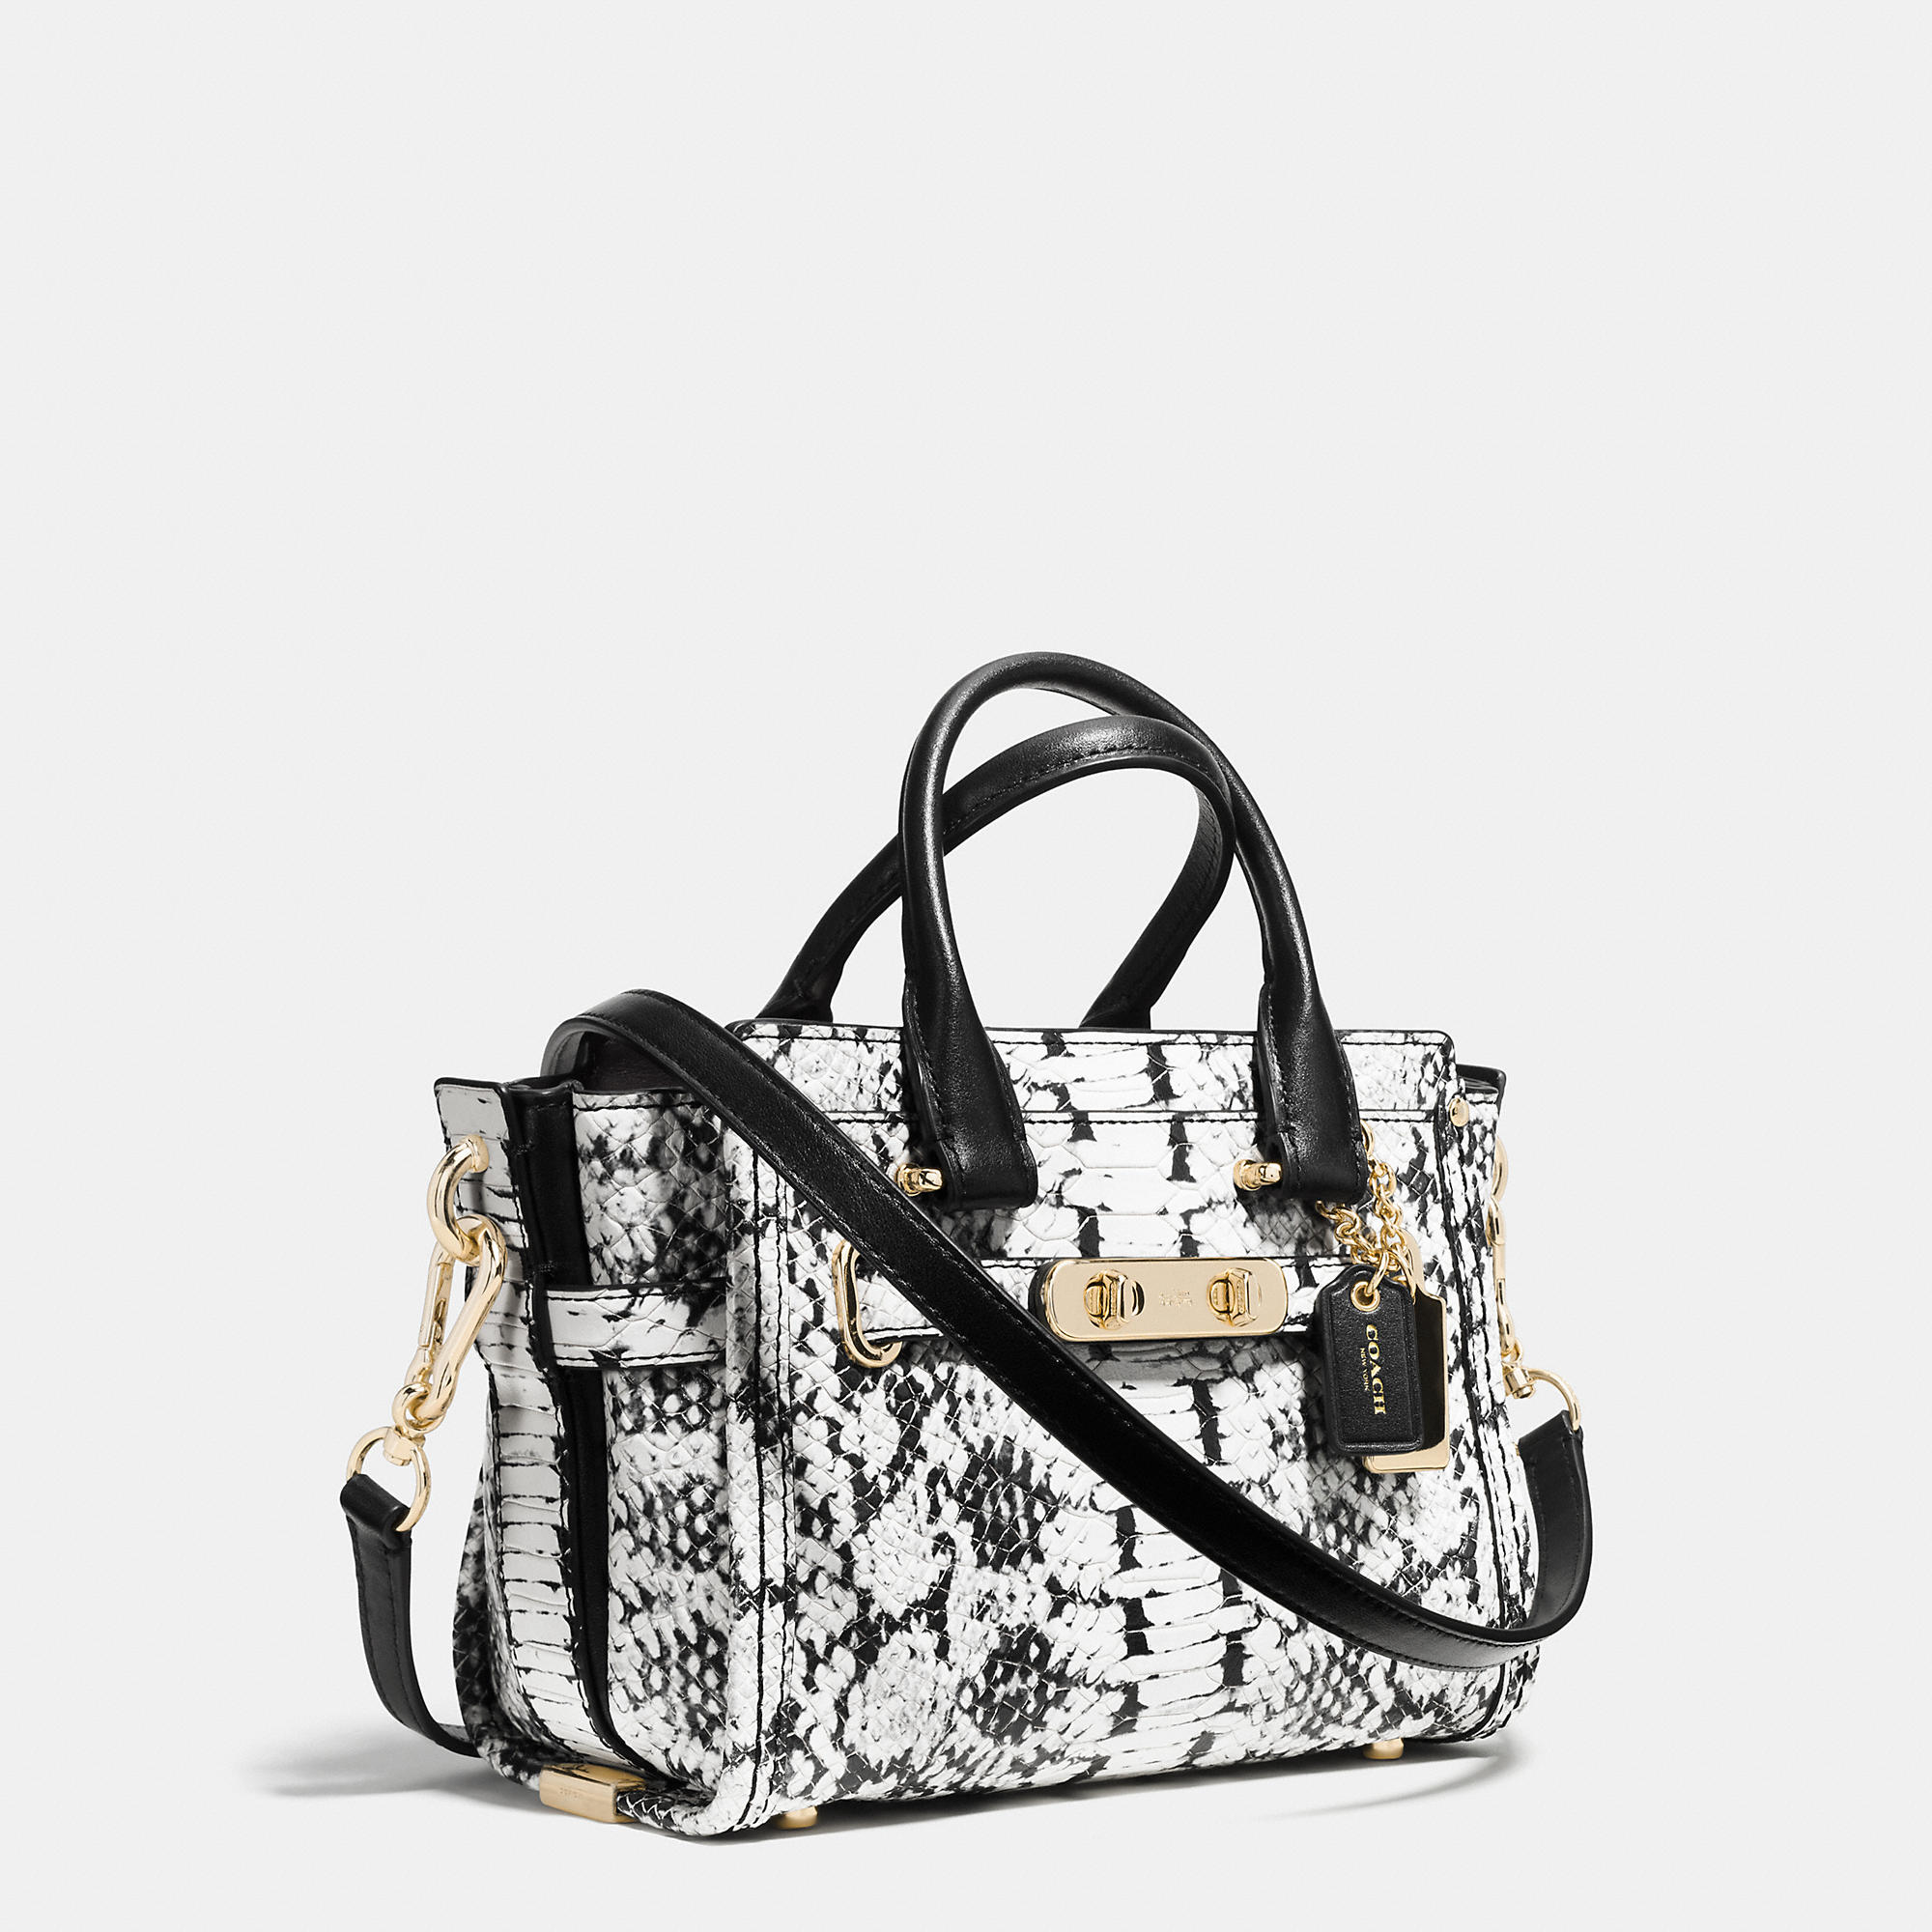 Lyst - Coach Swagger 20 In Colorblock Exotic Embossed Leather in Metallic